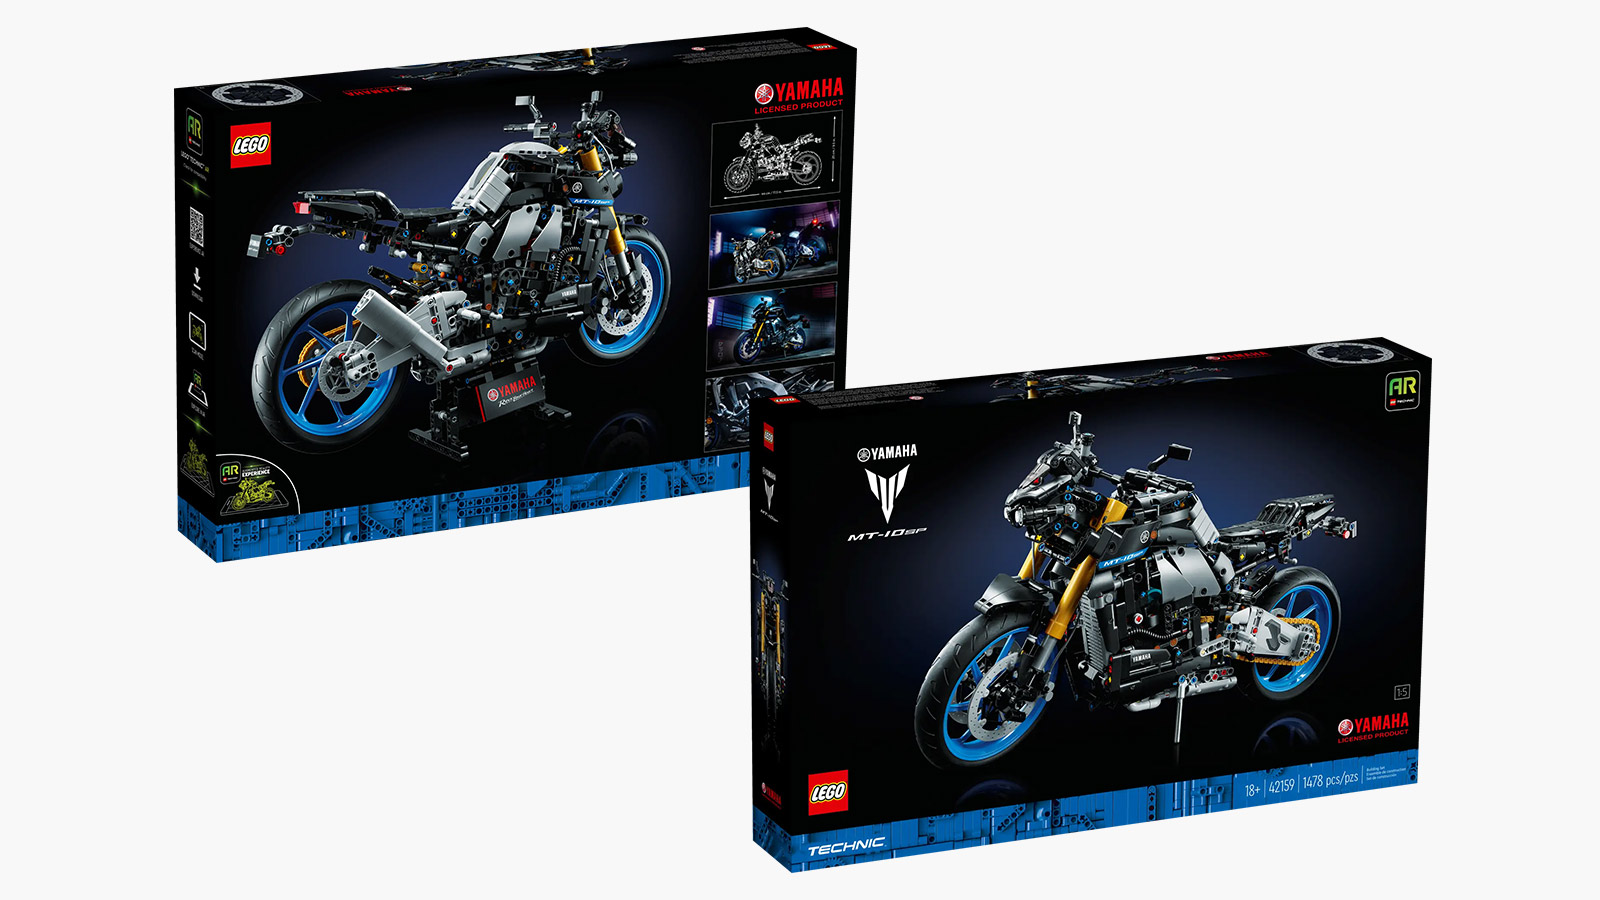 The LEGO Technic Yamaha MT-10 SP Is A Challenging Project For Motorcycle  Enthusiasts - IMBOLDN